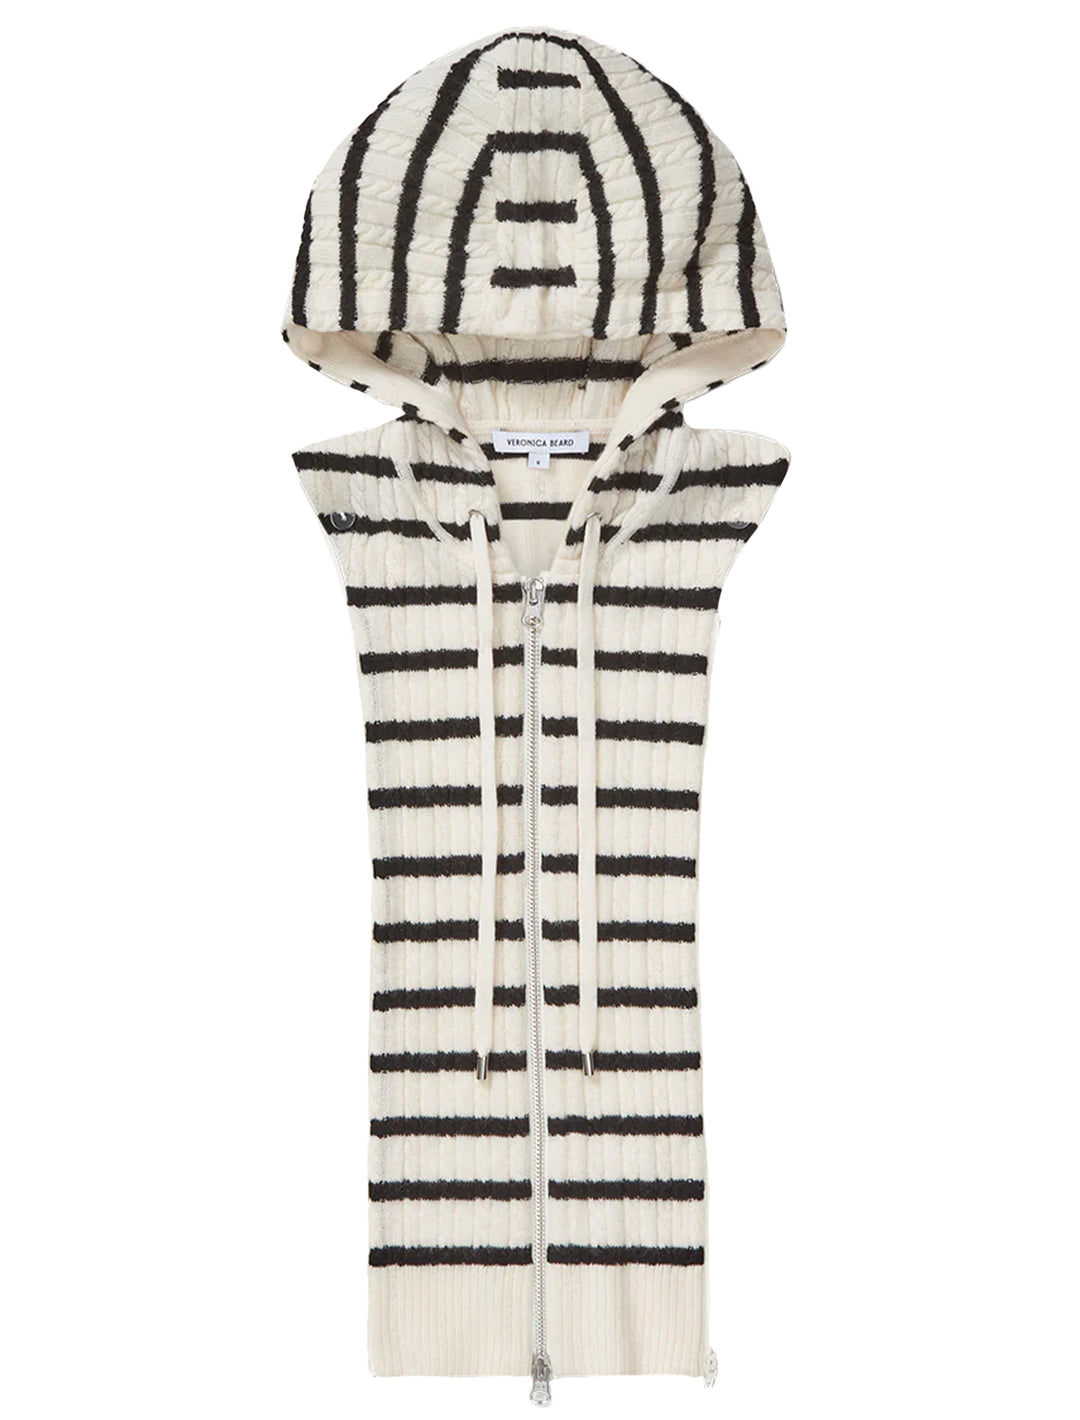 Overhead view of Veronica Beard's bunny hoodie dickey in off white and black stripe.